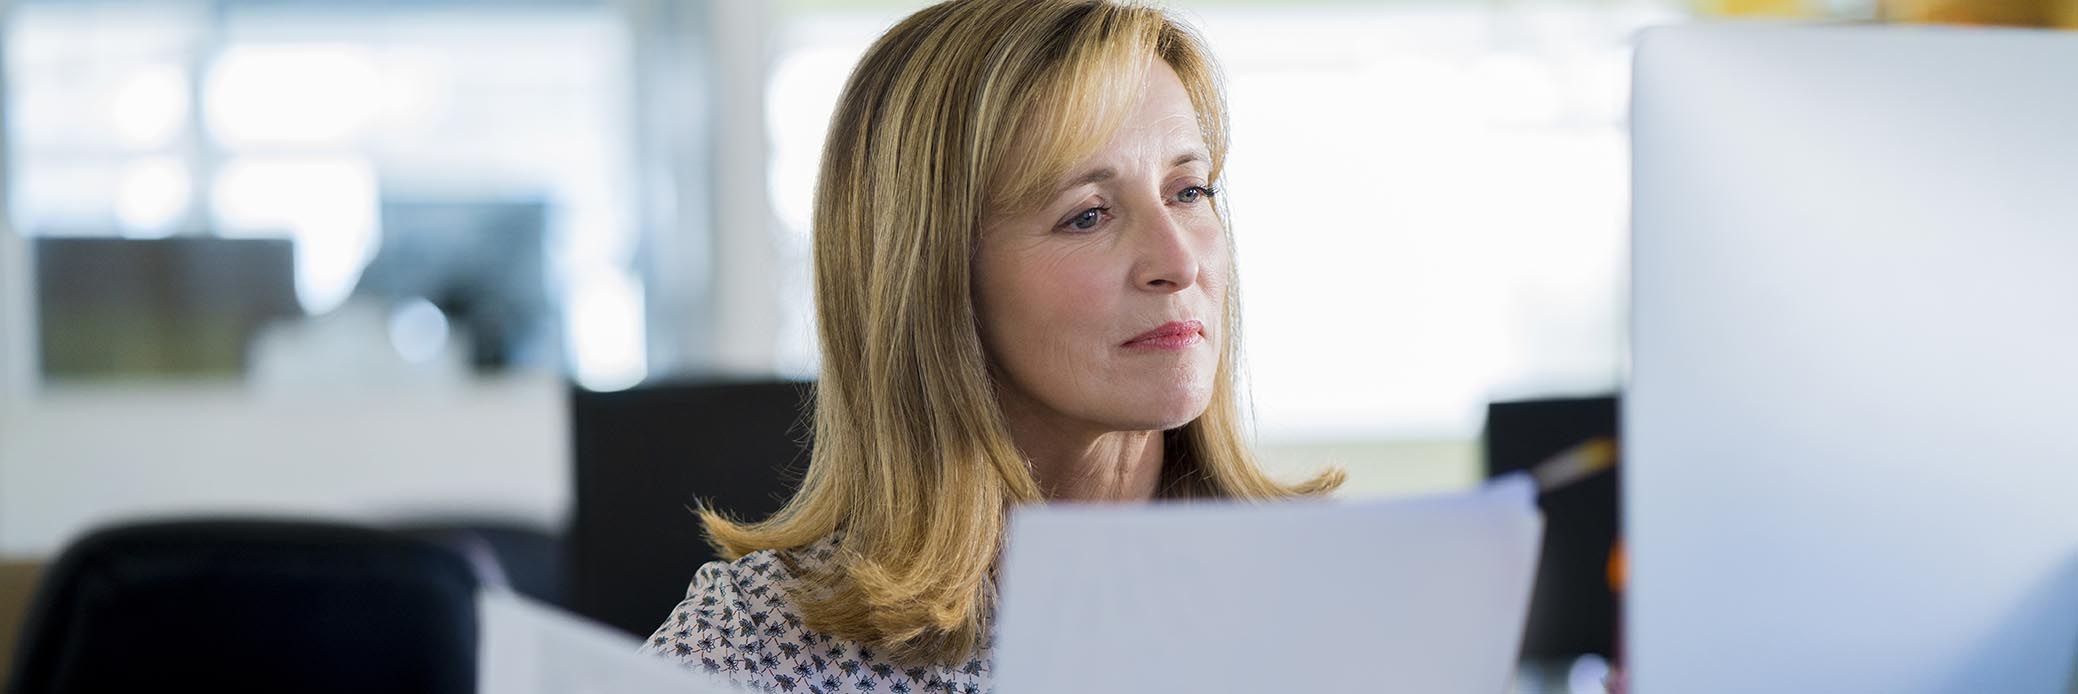 woman in office looking through papers